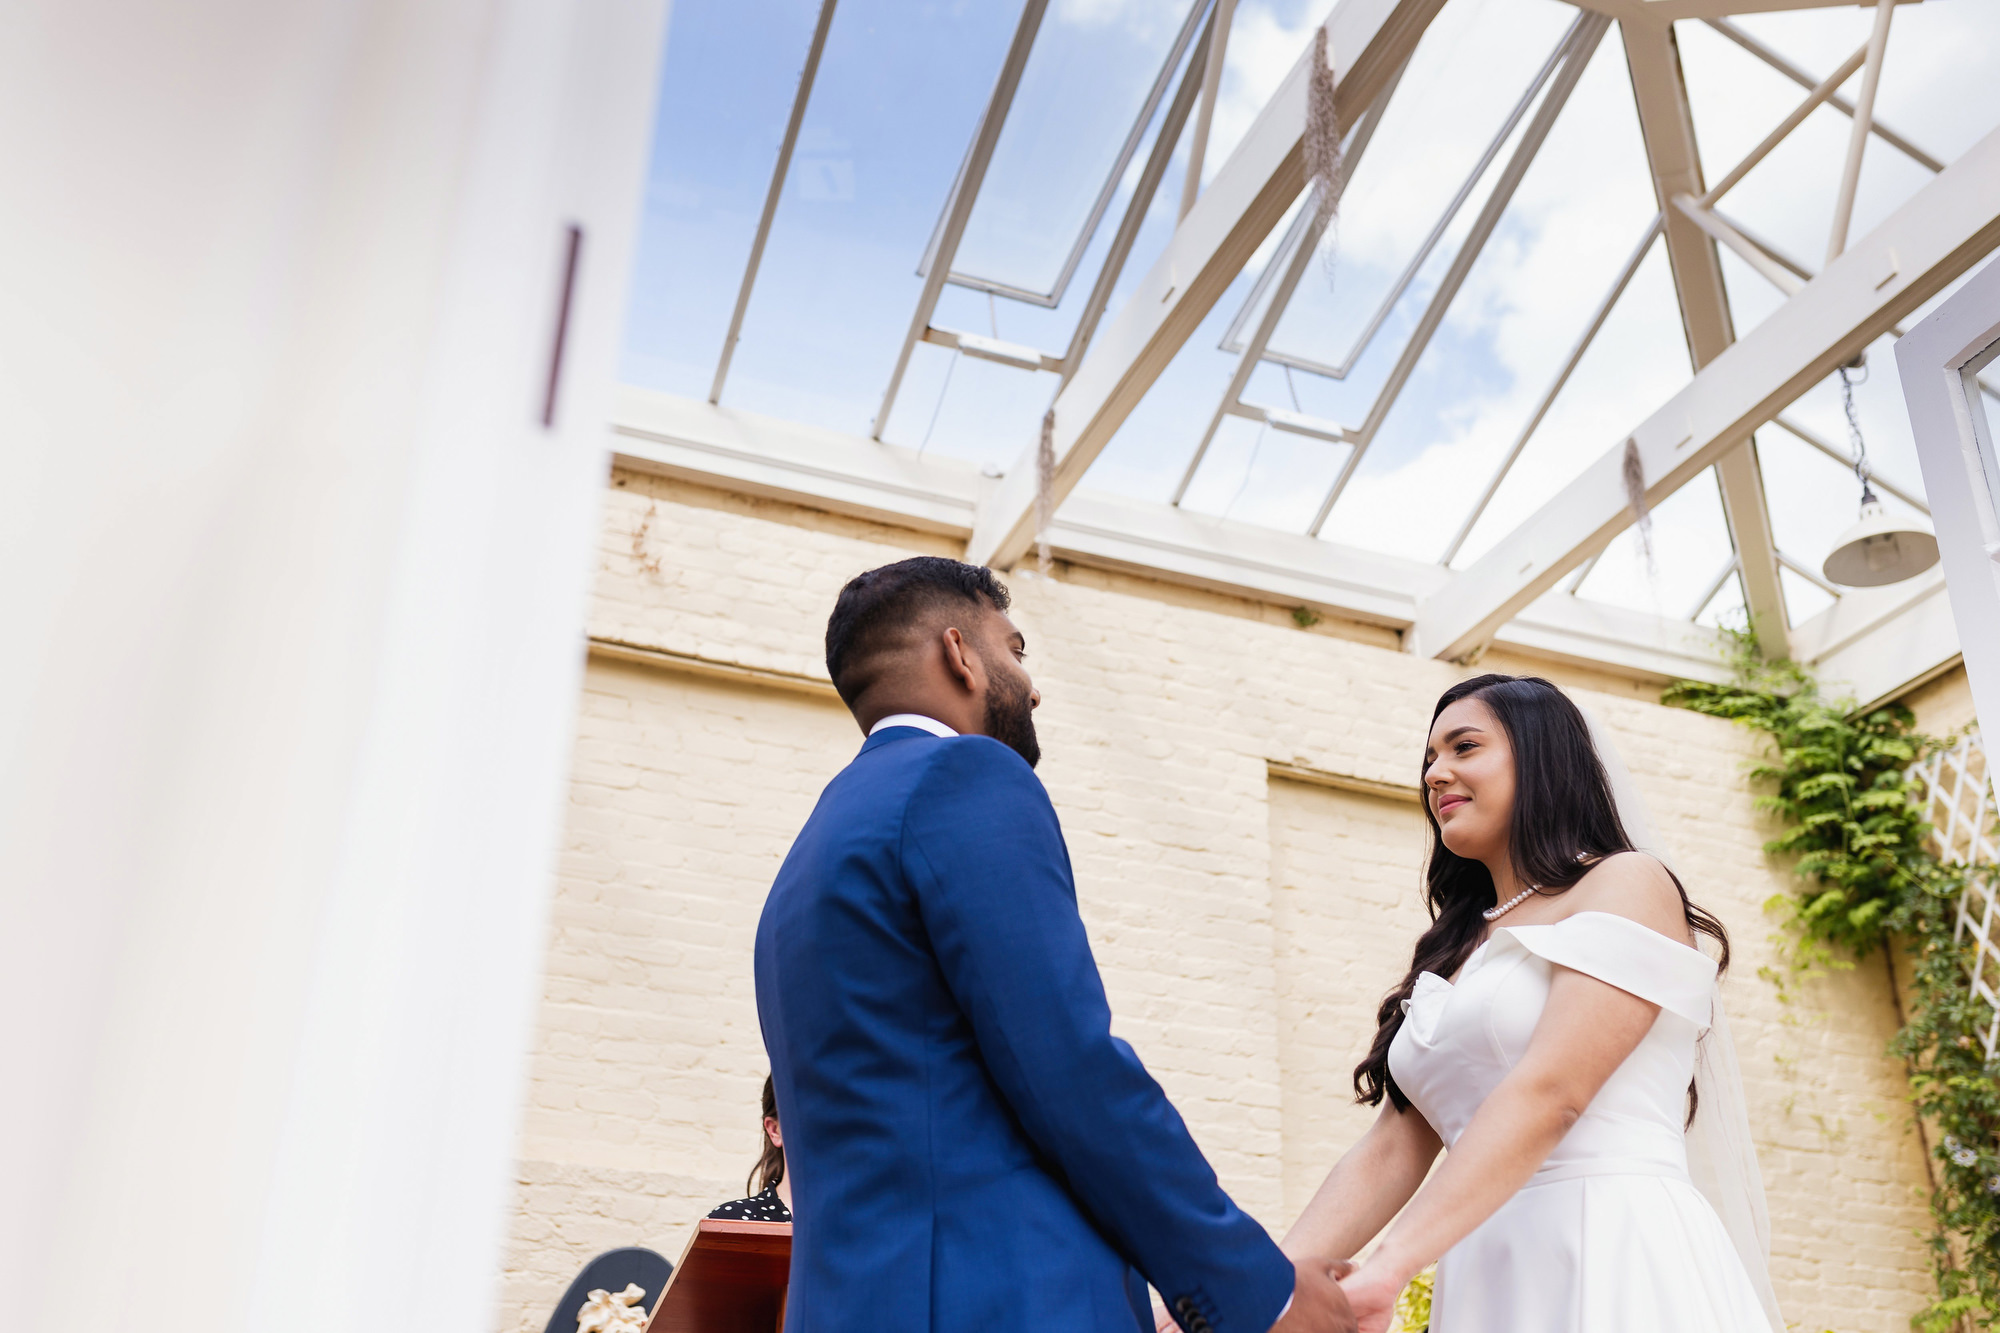 Langtons House, Essex, Natural wedding photography, Civil ceremony, the orangery room